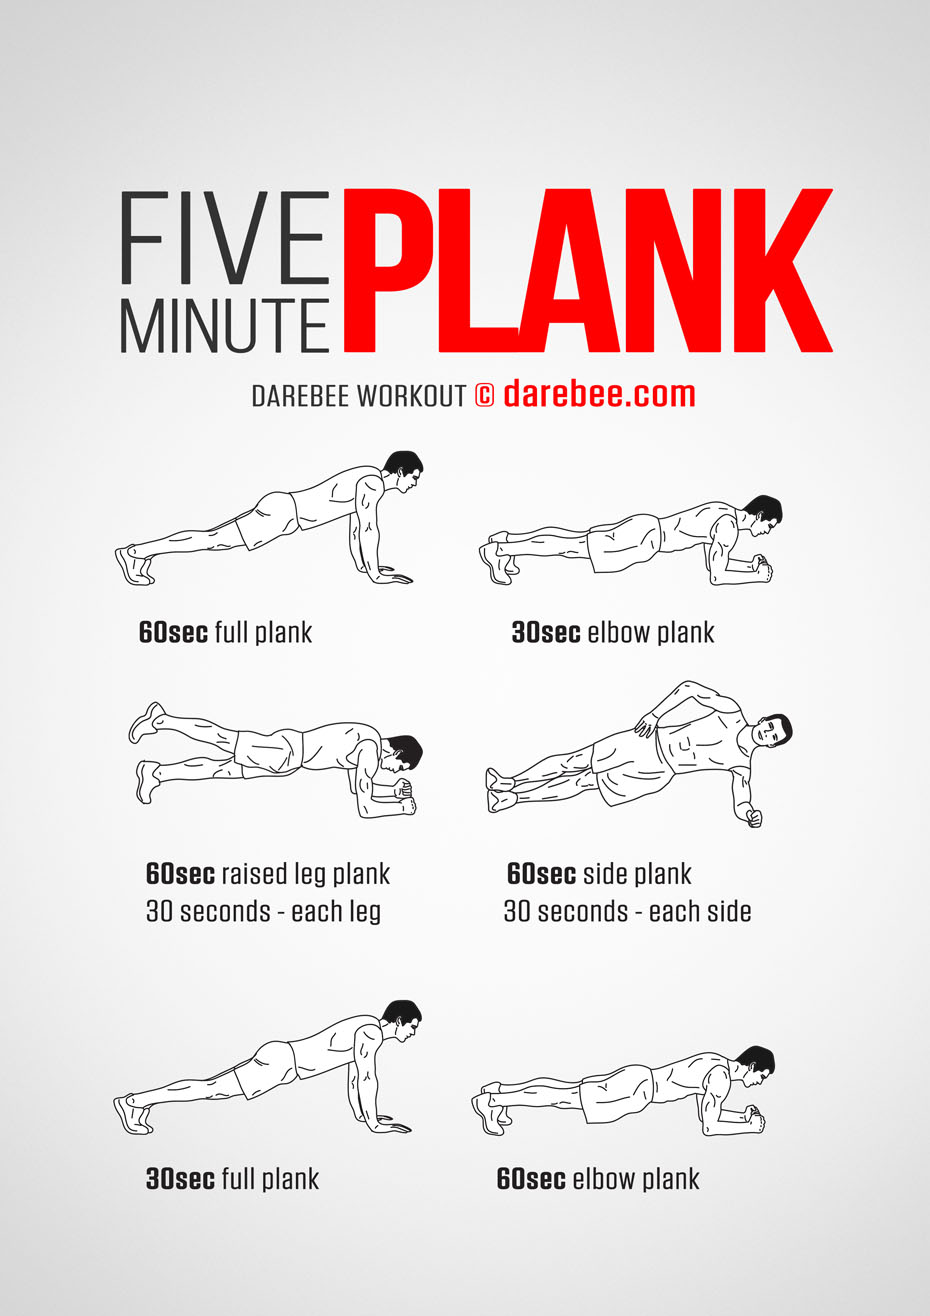 Five Minute Plank is a DAREBEE home fitness bodyweight workout that will help you develop strong core and strong abs at home.